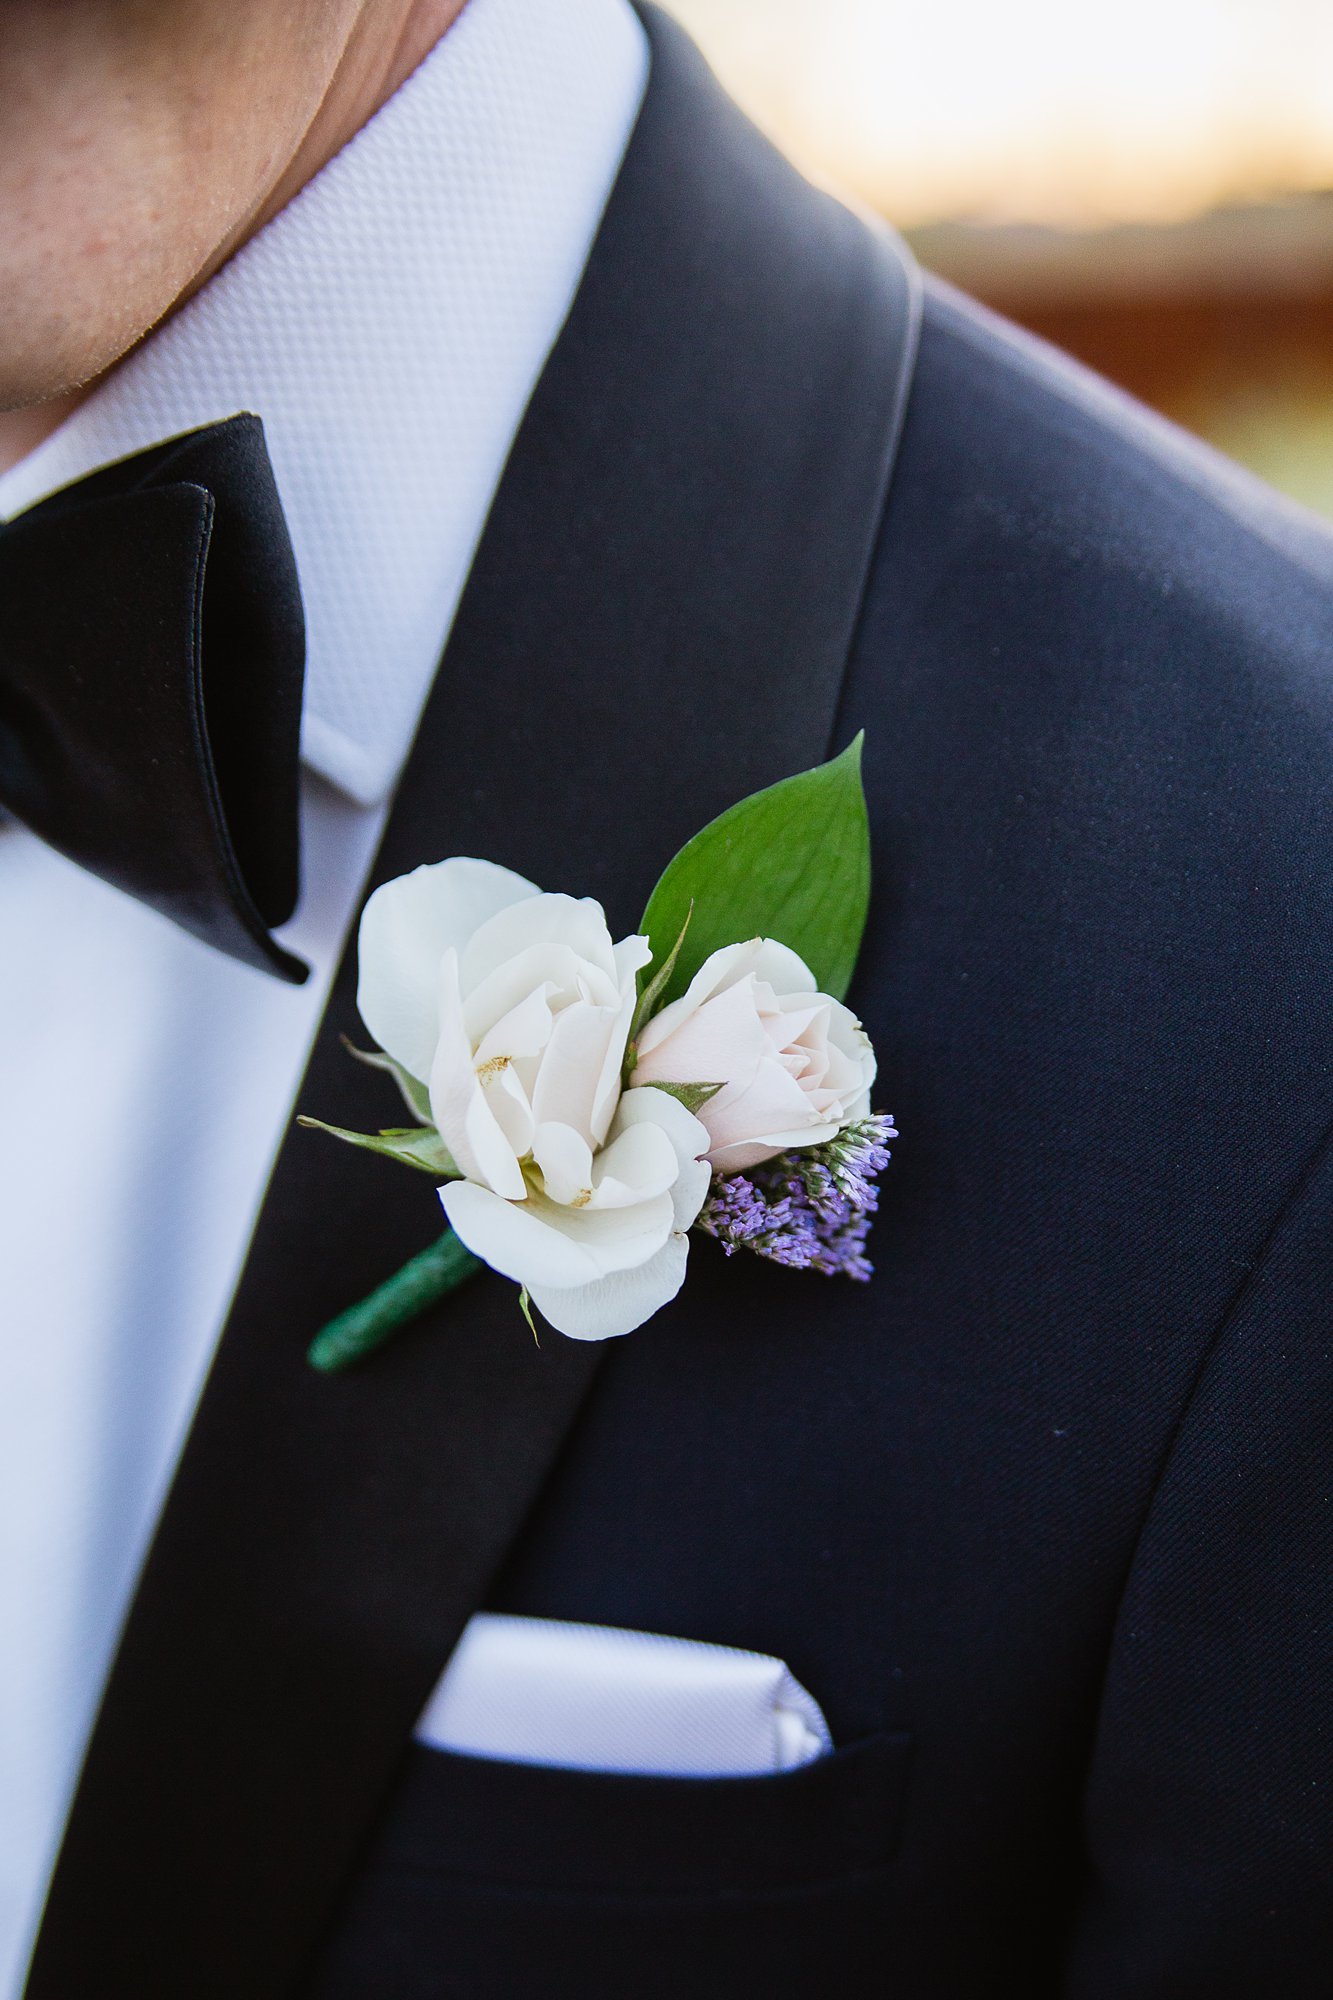 Close up image of a small rose boutonniere on a grooms custom made tux.